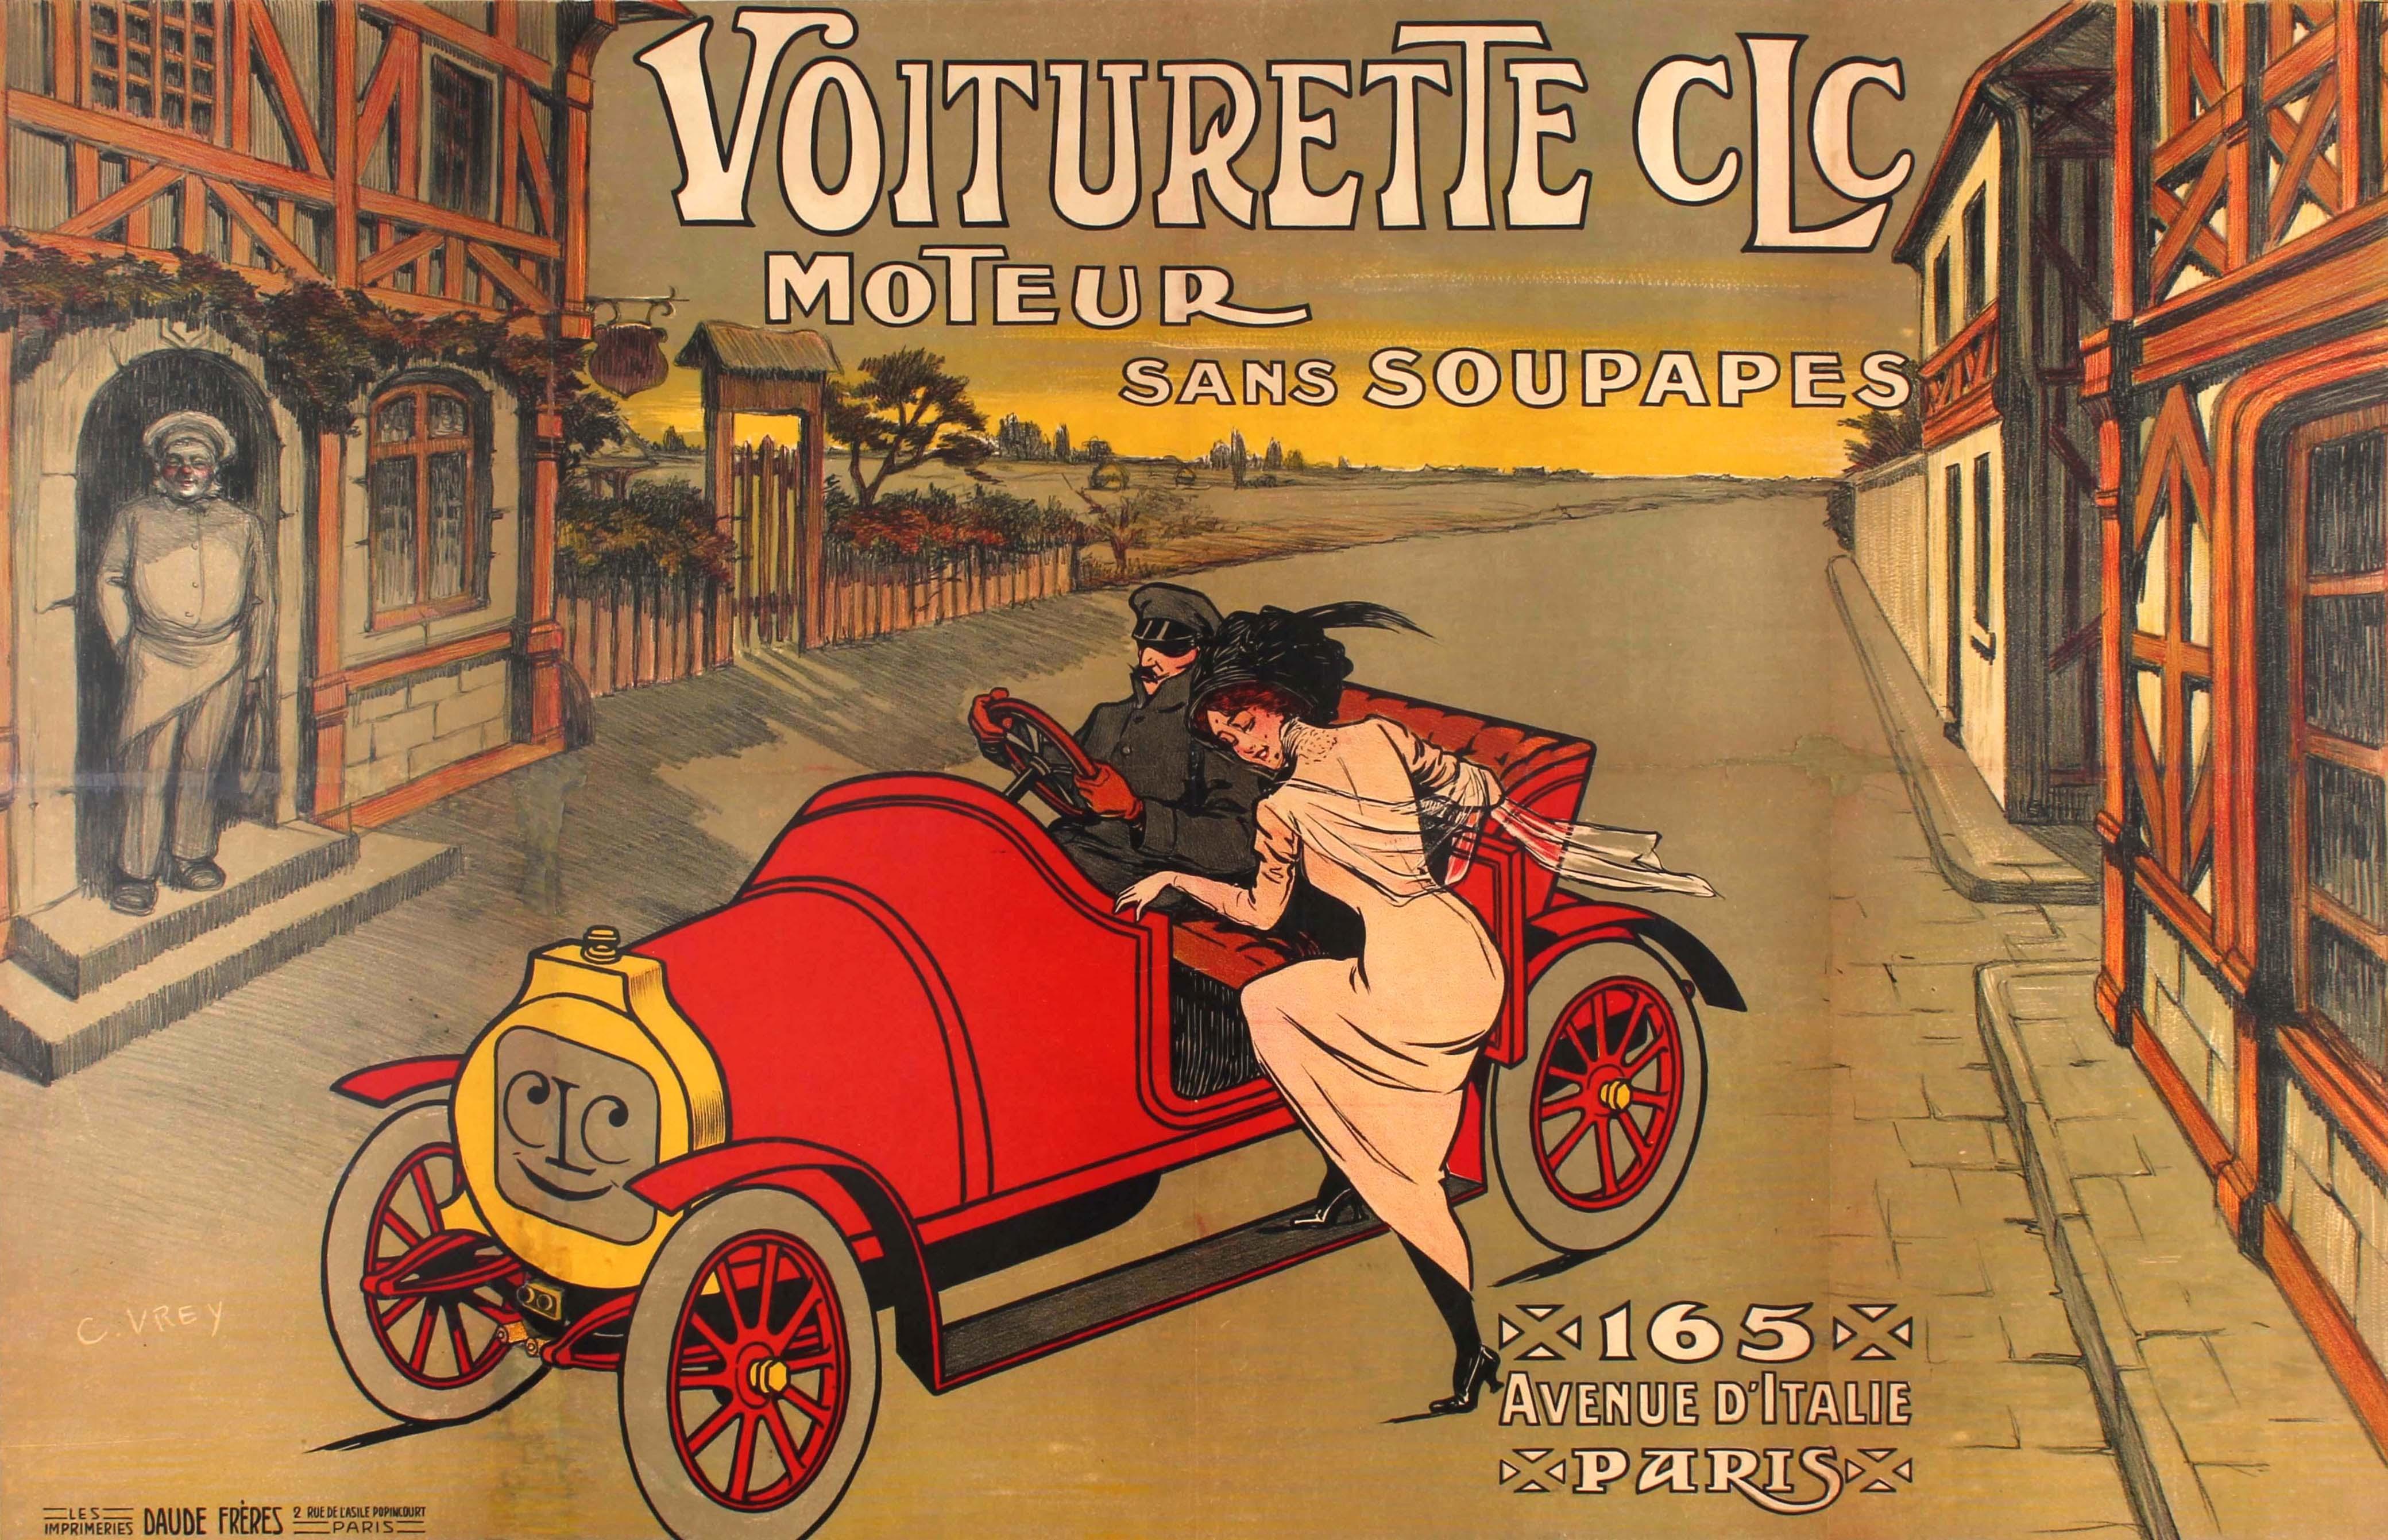 Original antique early car advertising poster for the Voiturette CLC miniature automobile Moteur sans soupapes / Engine without valves featuring a fantastic illustration showing a lady wearing a fashionable dress and hat climbing into a red